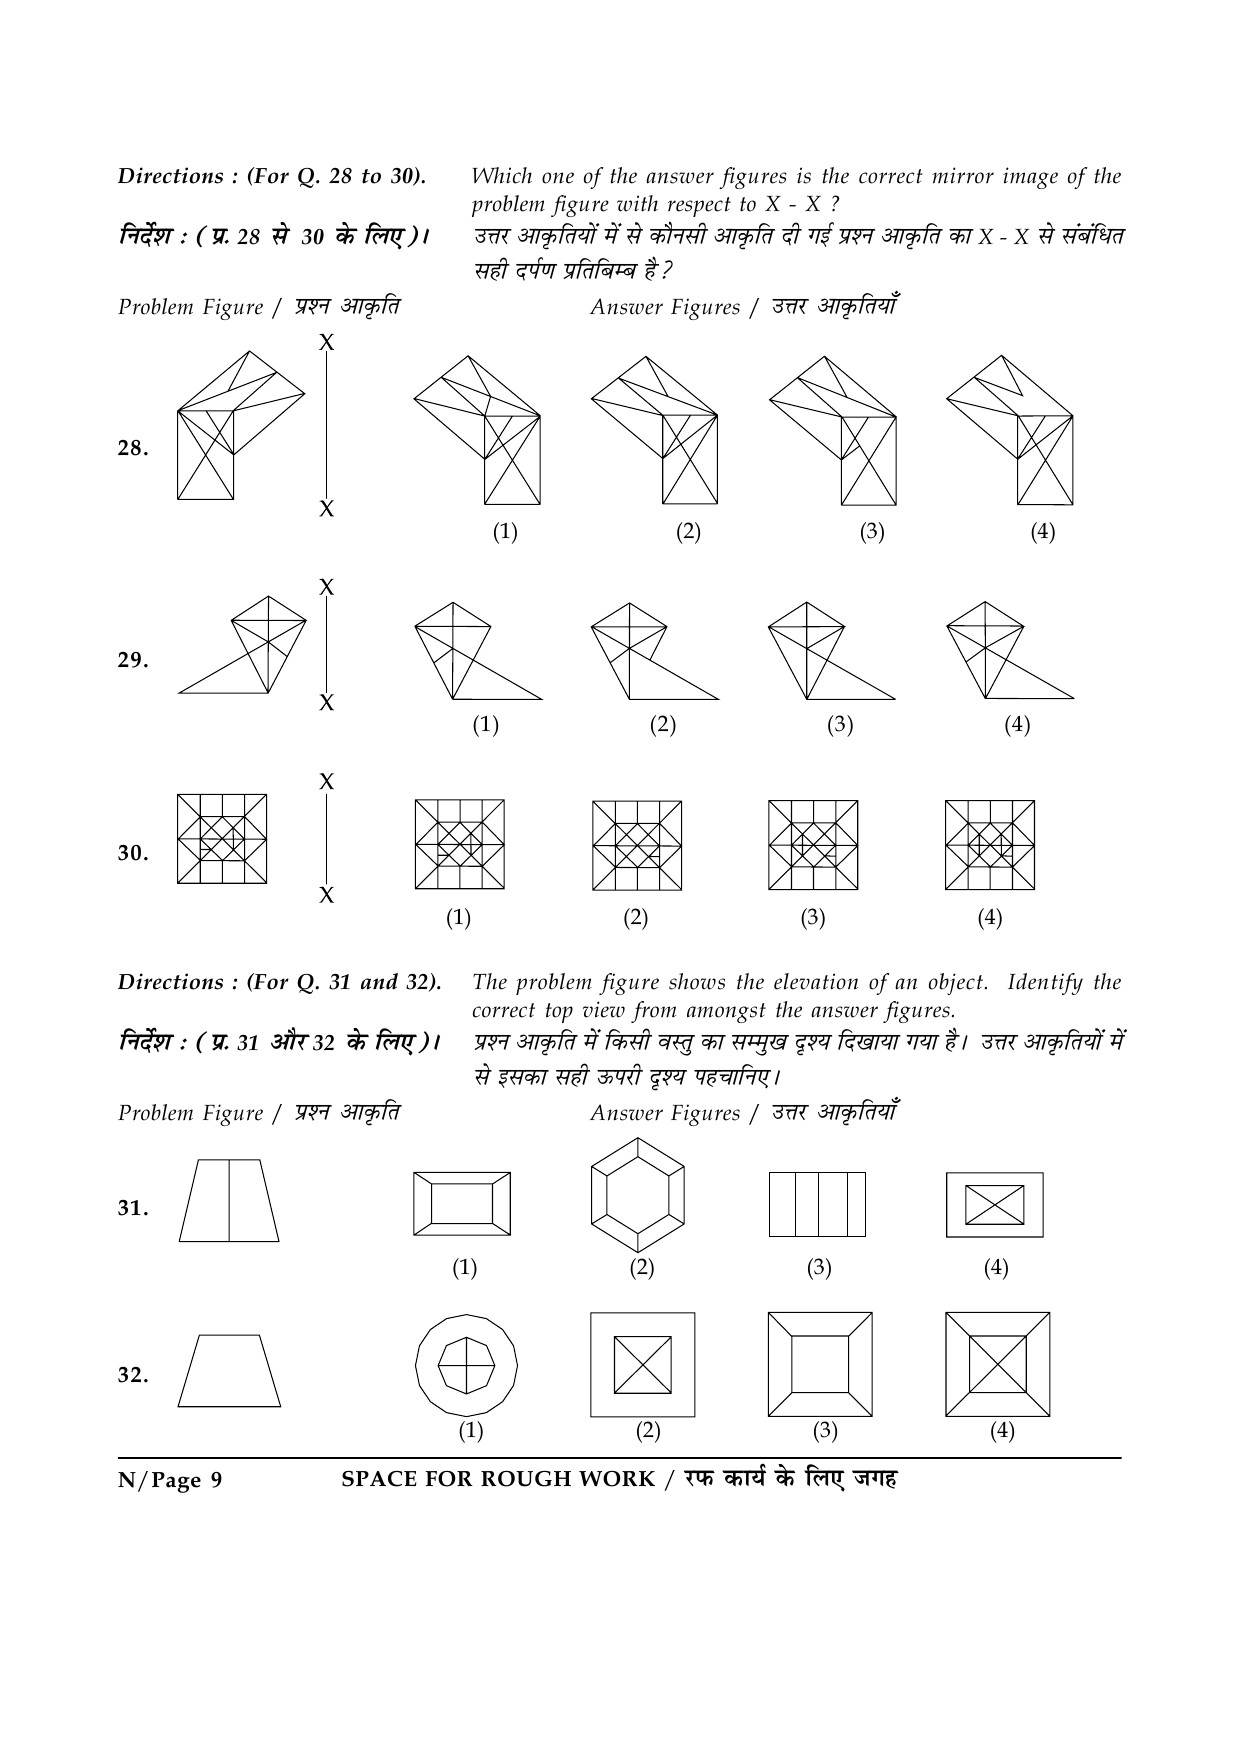 JEE Main Exam Question Paper 2015 Booklet N 9